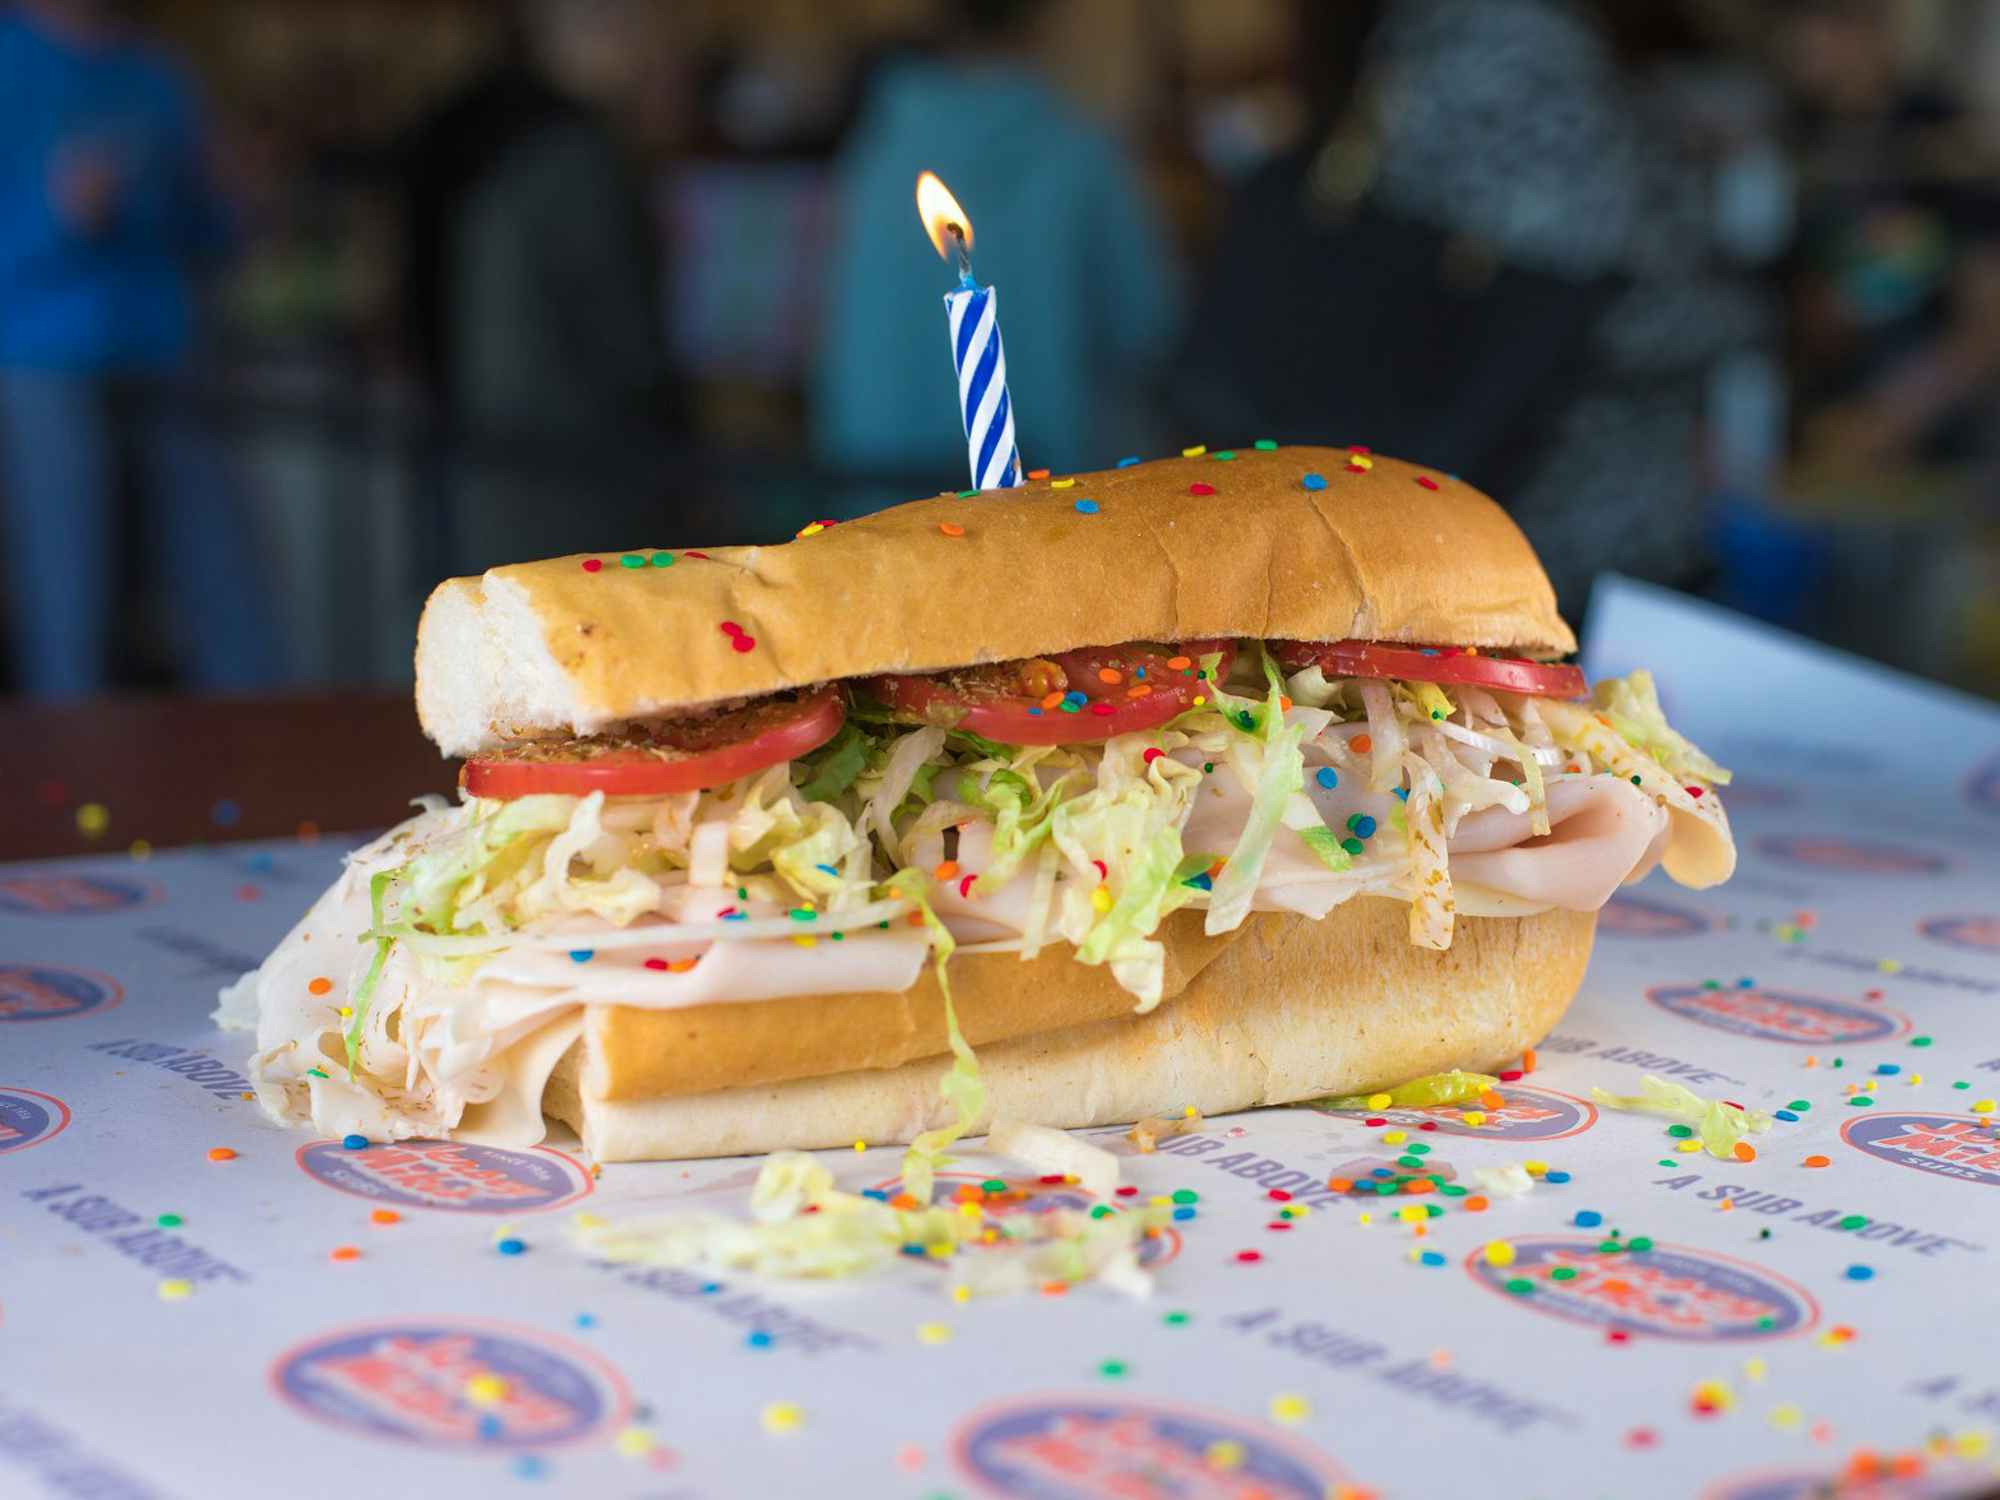 A Jersey Mike's sub with a birthday candle stuck into it